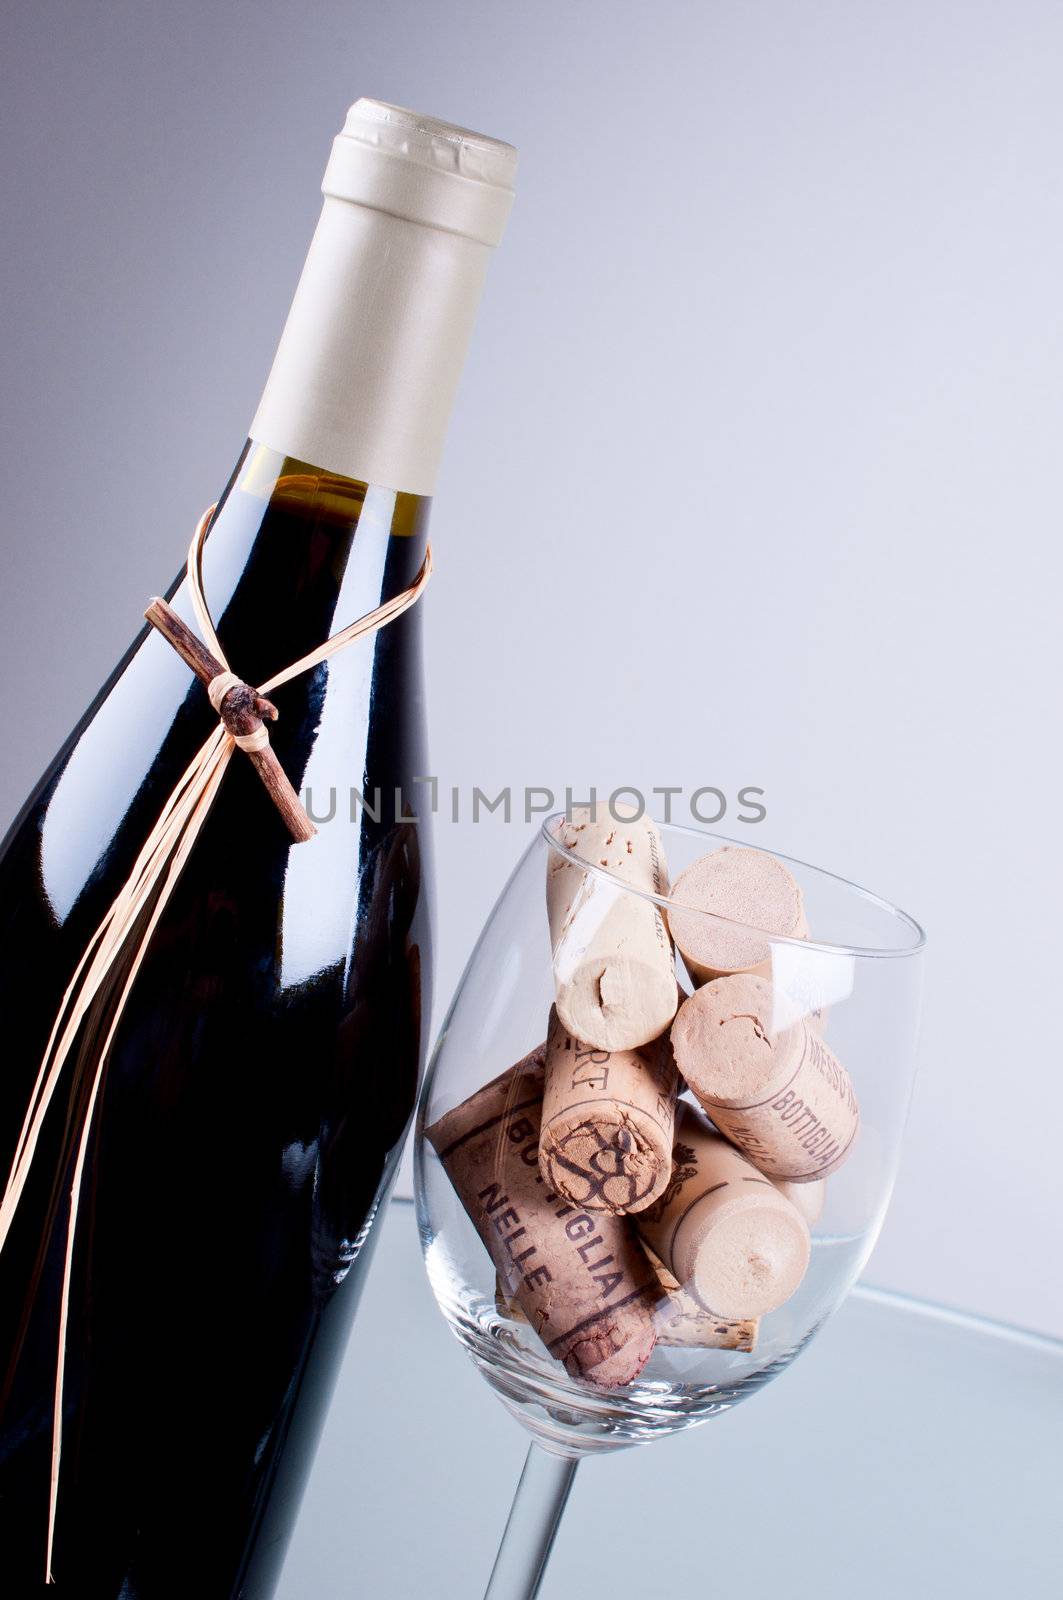 Wine bottle and glass full corks close up